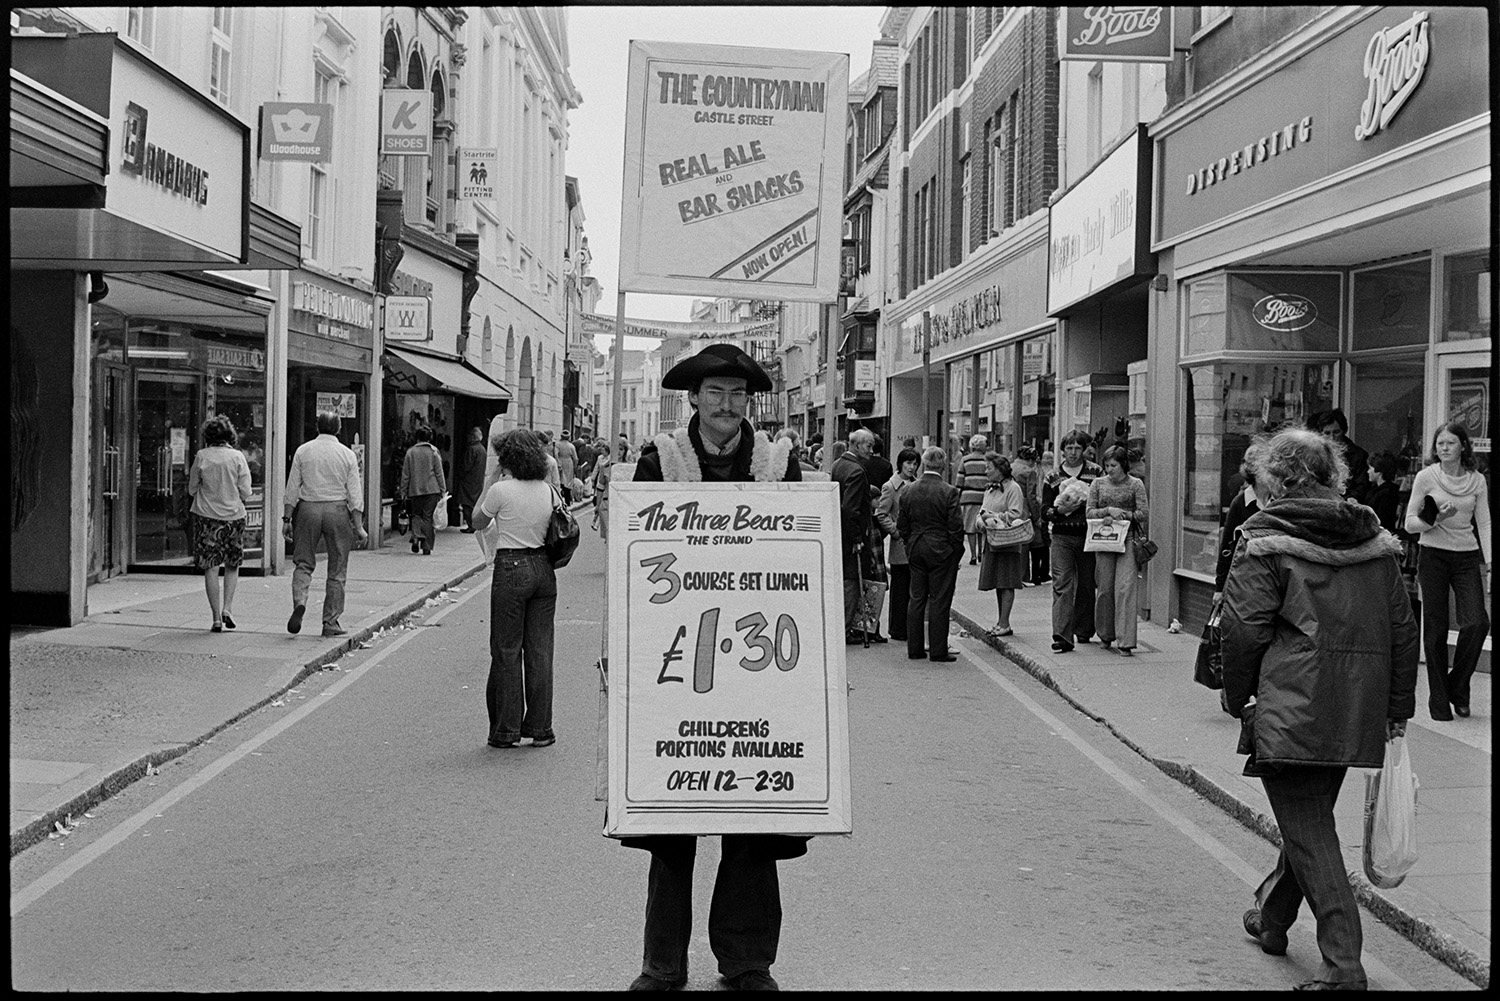 Sandwich board man in town street. 
[A man wearing a sandwich board and tricorn hat advertising The Countryman and The Three Bears pubs in Barnstaple High Street. Shoppers are walking along the street and various shop fronts are visible, including Boots and Marks & Spencer.]